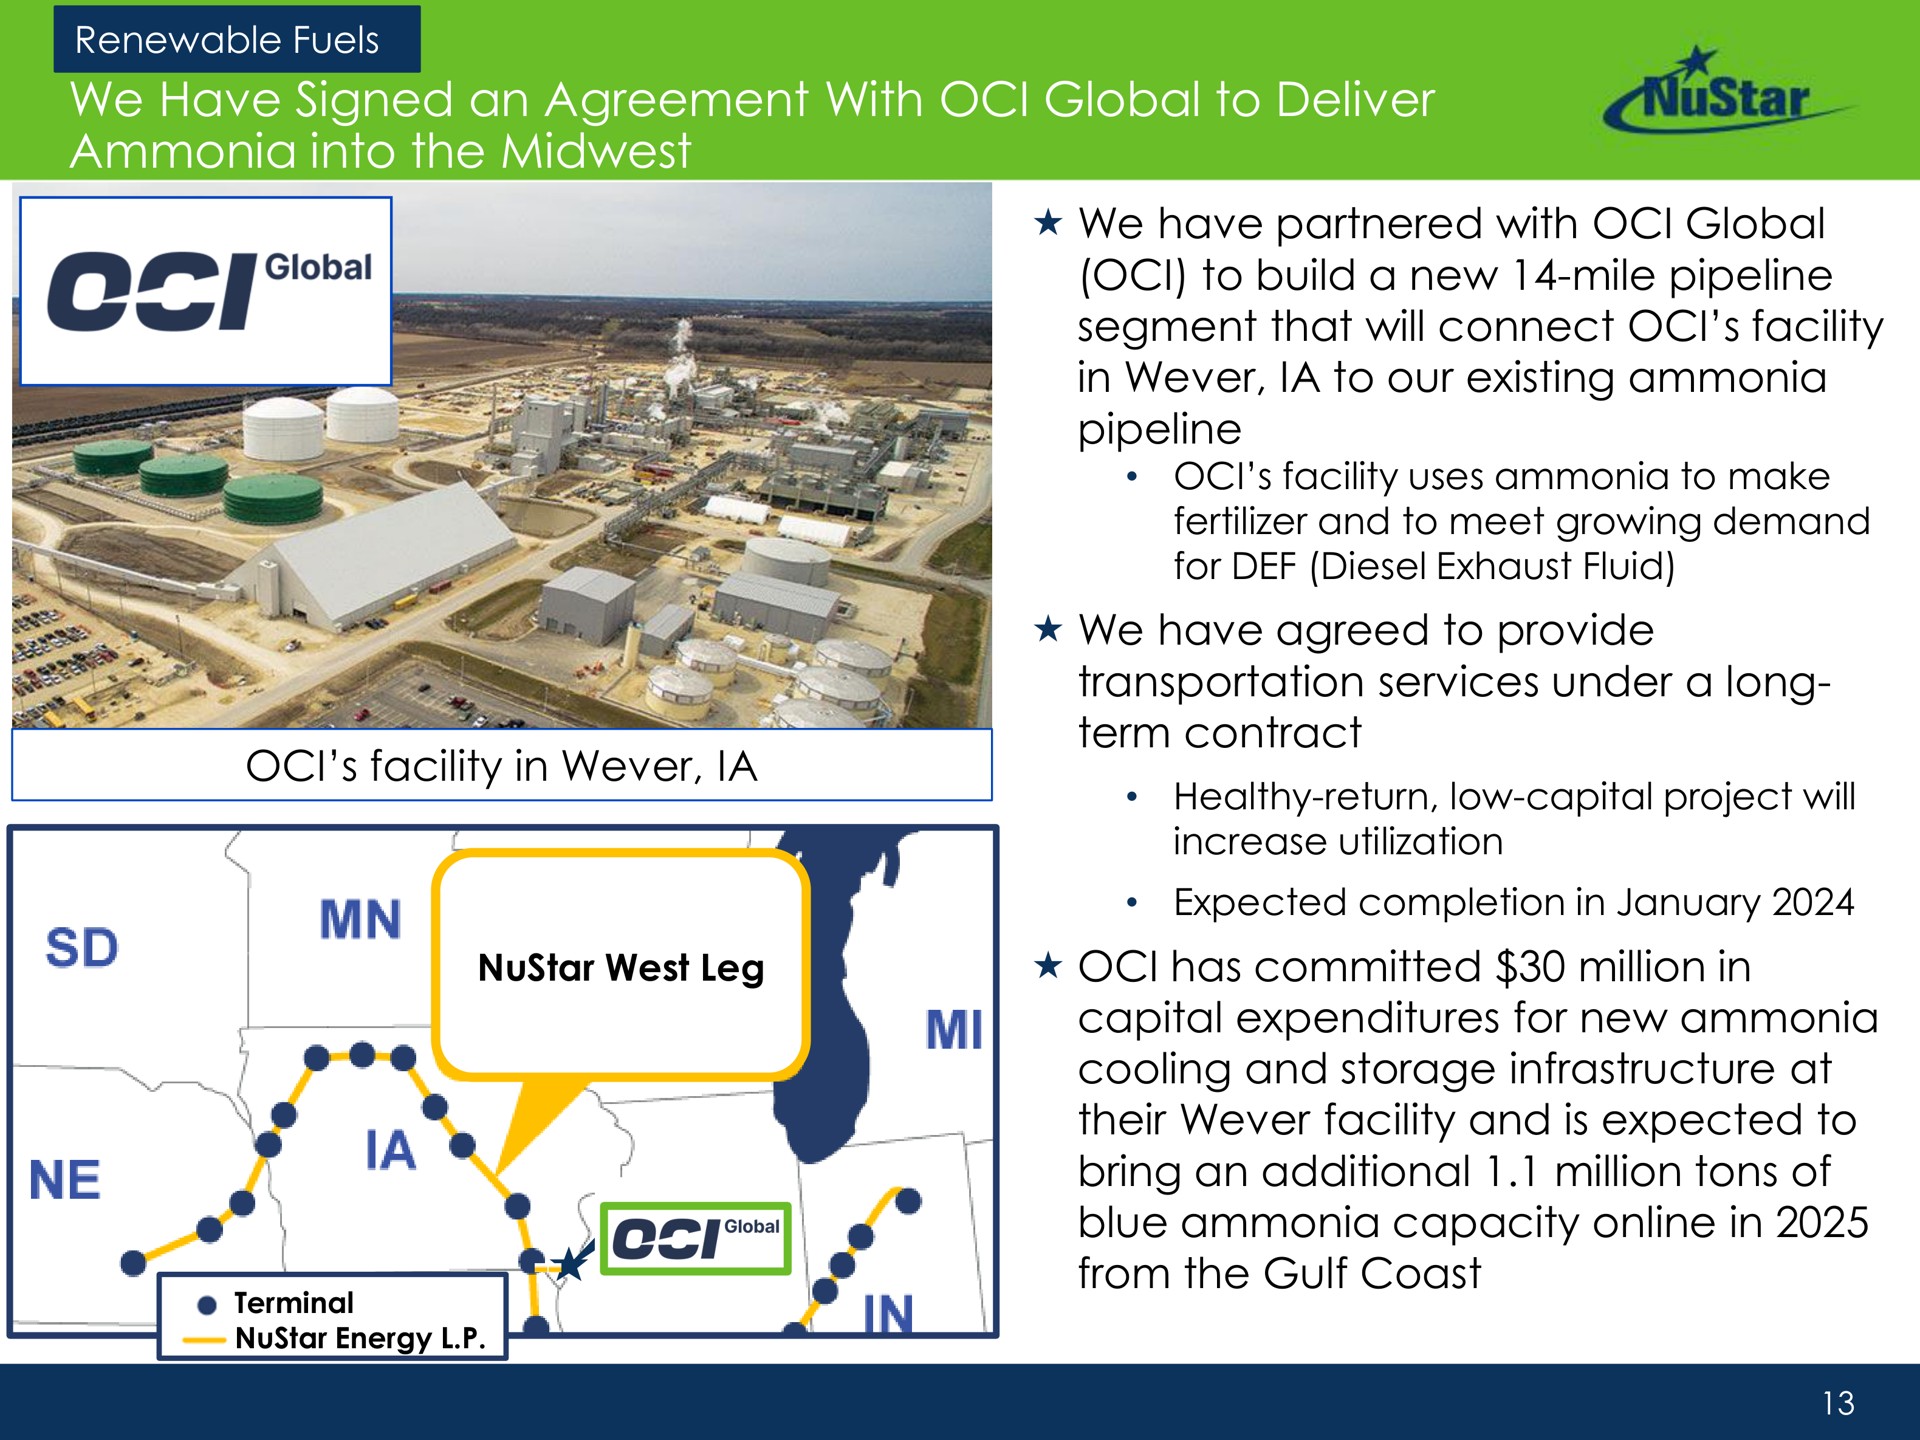 we have signed an agreement with global to deliver ammonia into the build a new mile pipeline segment that will connect facility agreed provide transportation services under a long term contract a cooling and storage infrastructure at their facility and is expected blue capacity in | NuStar Energy